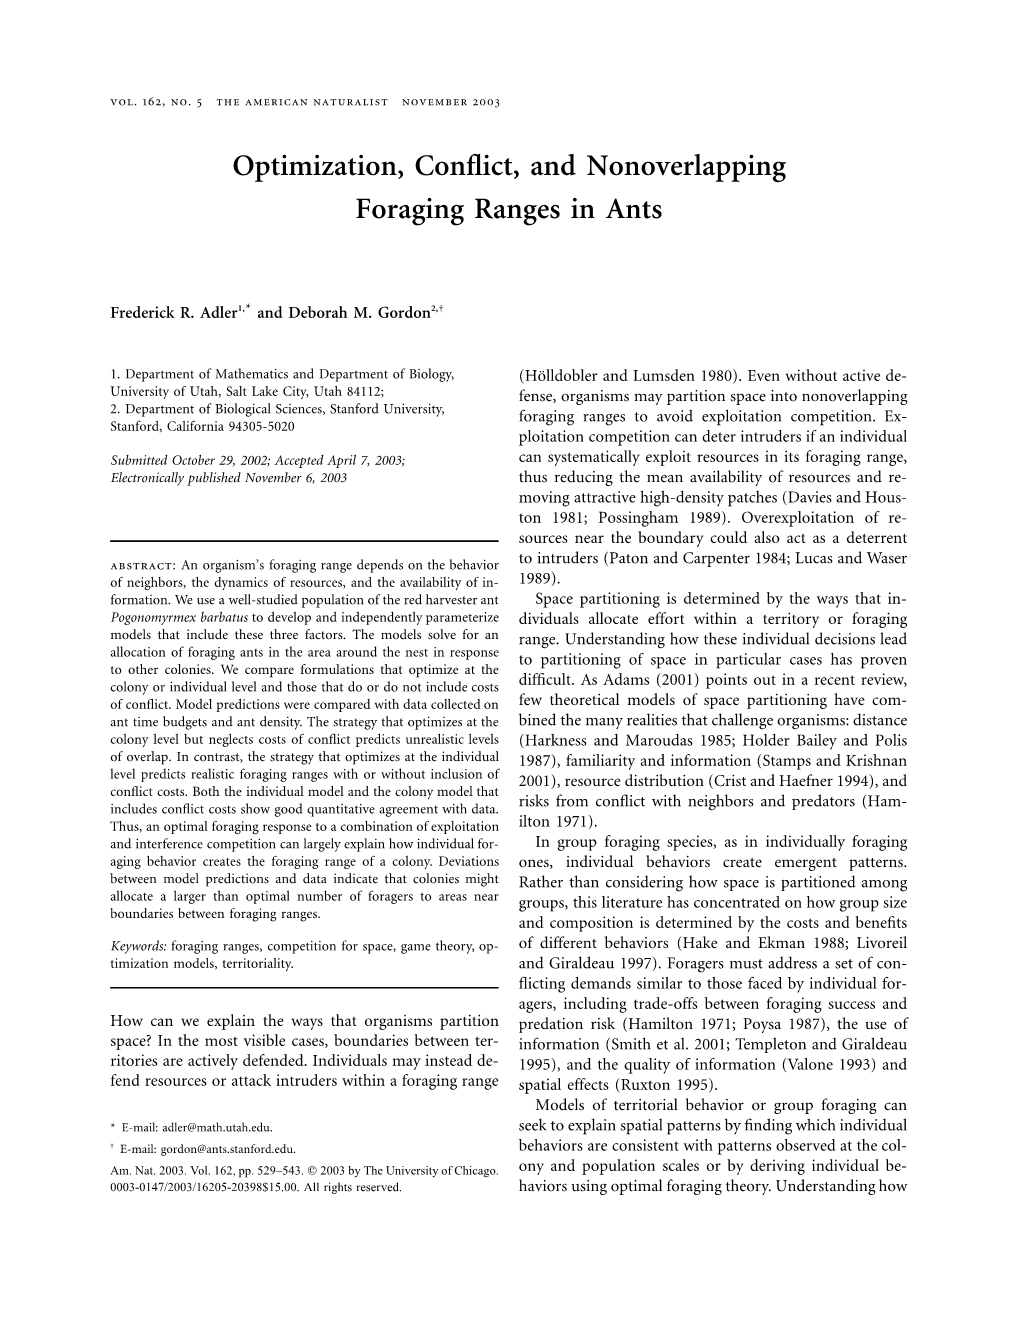 Optimization, Conflict, and Nonoverlapping Foraging Ranges